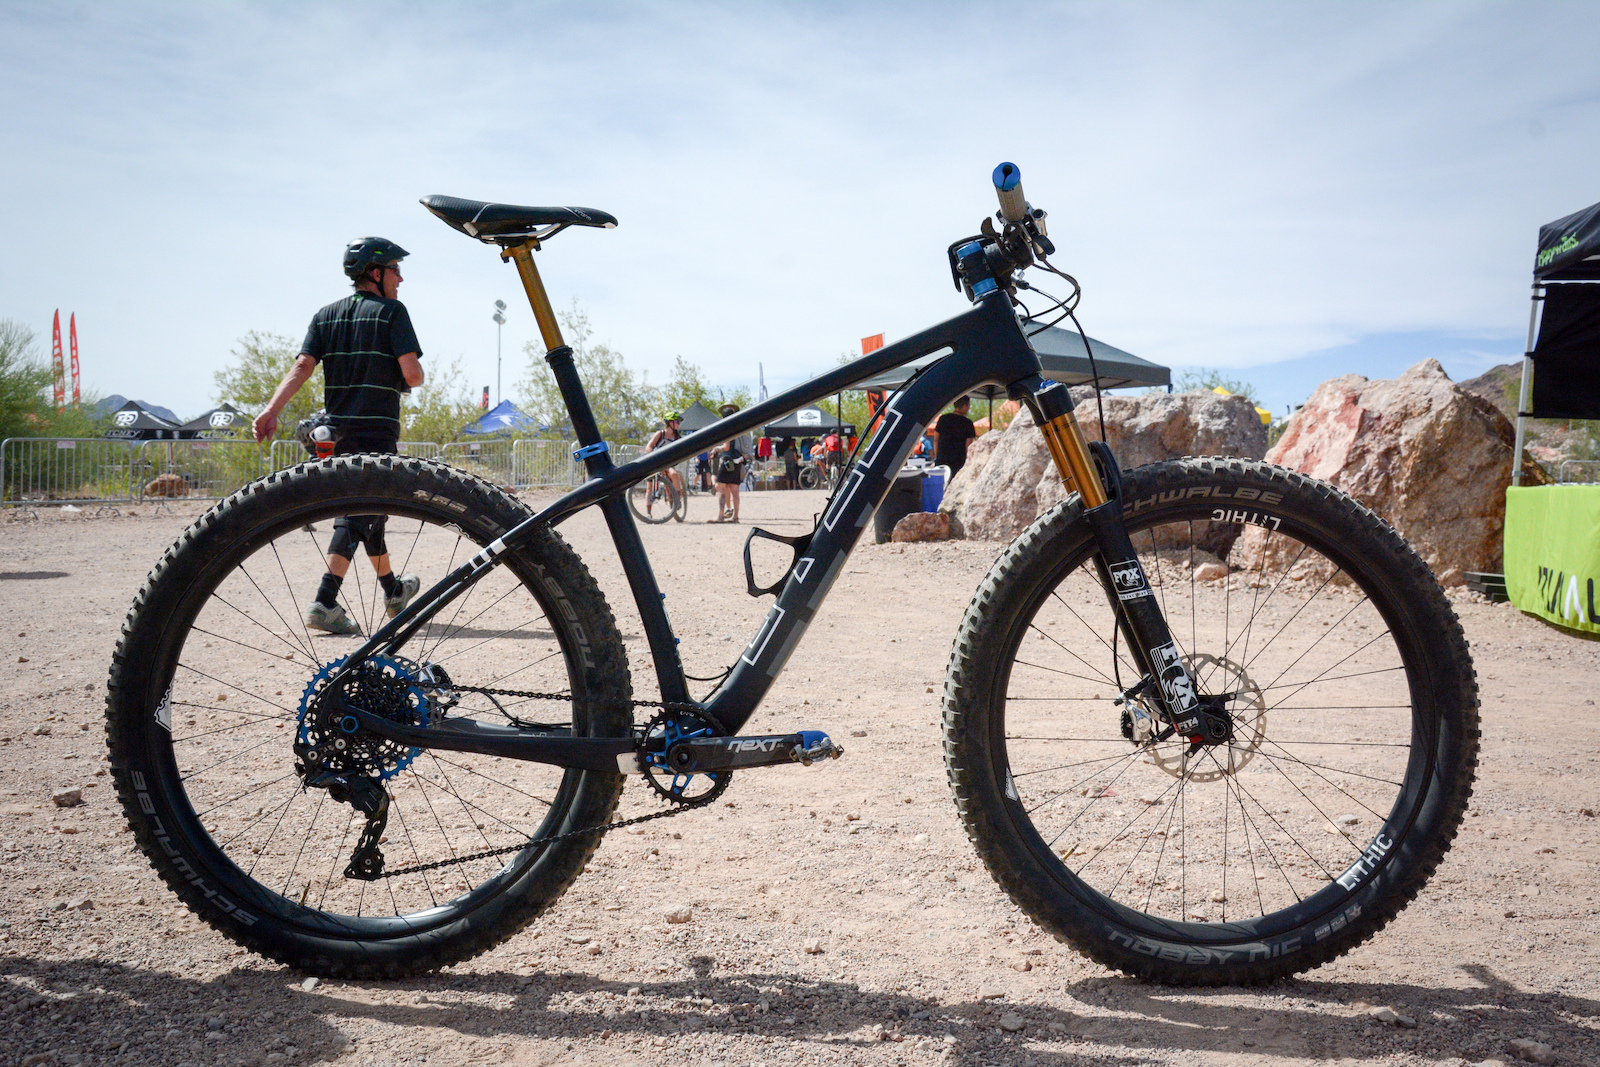 Wolf Tooth Components branched out into the bike brand business just last month with the launch of Otso Cycles. Their  27.5-plus, 29-plus or fat bike convertible hard tail Voytek was on display at the demo decked out in a